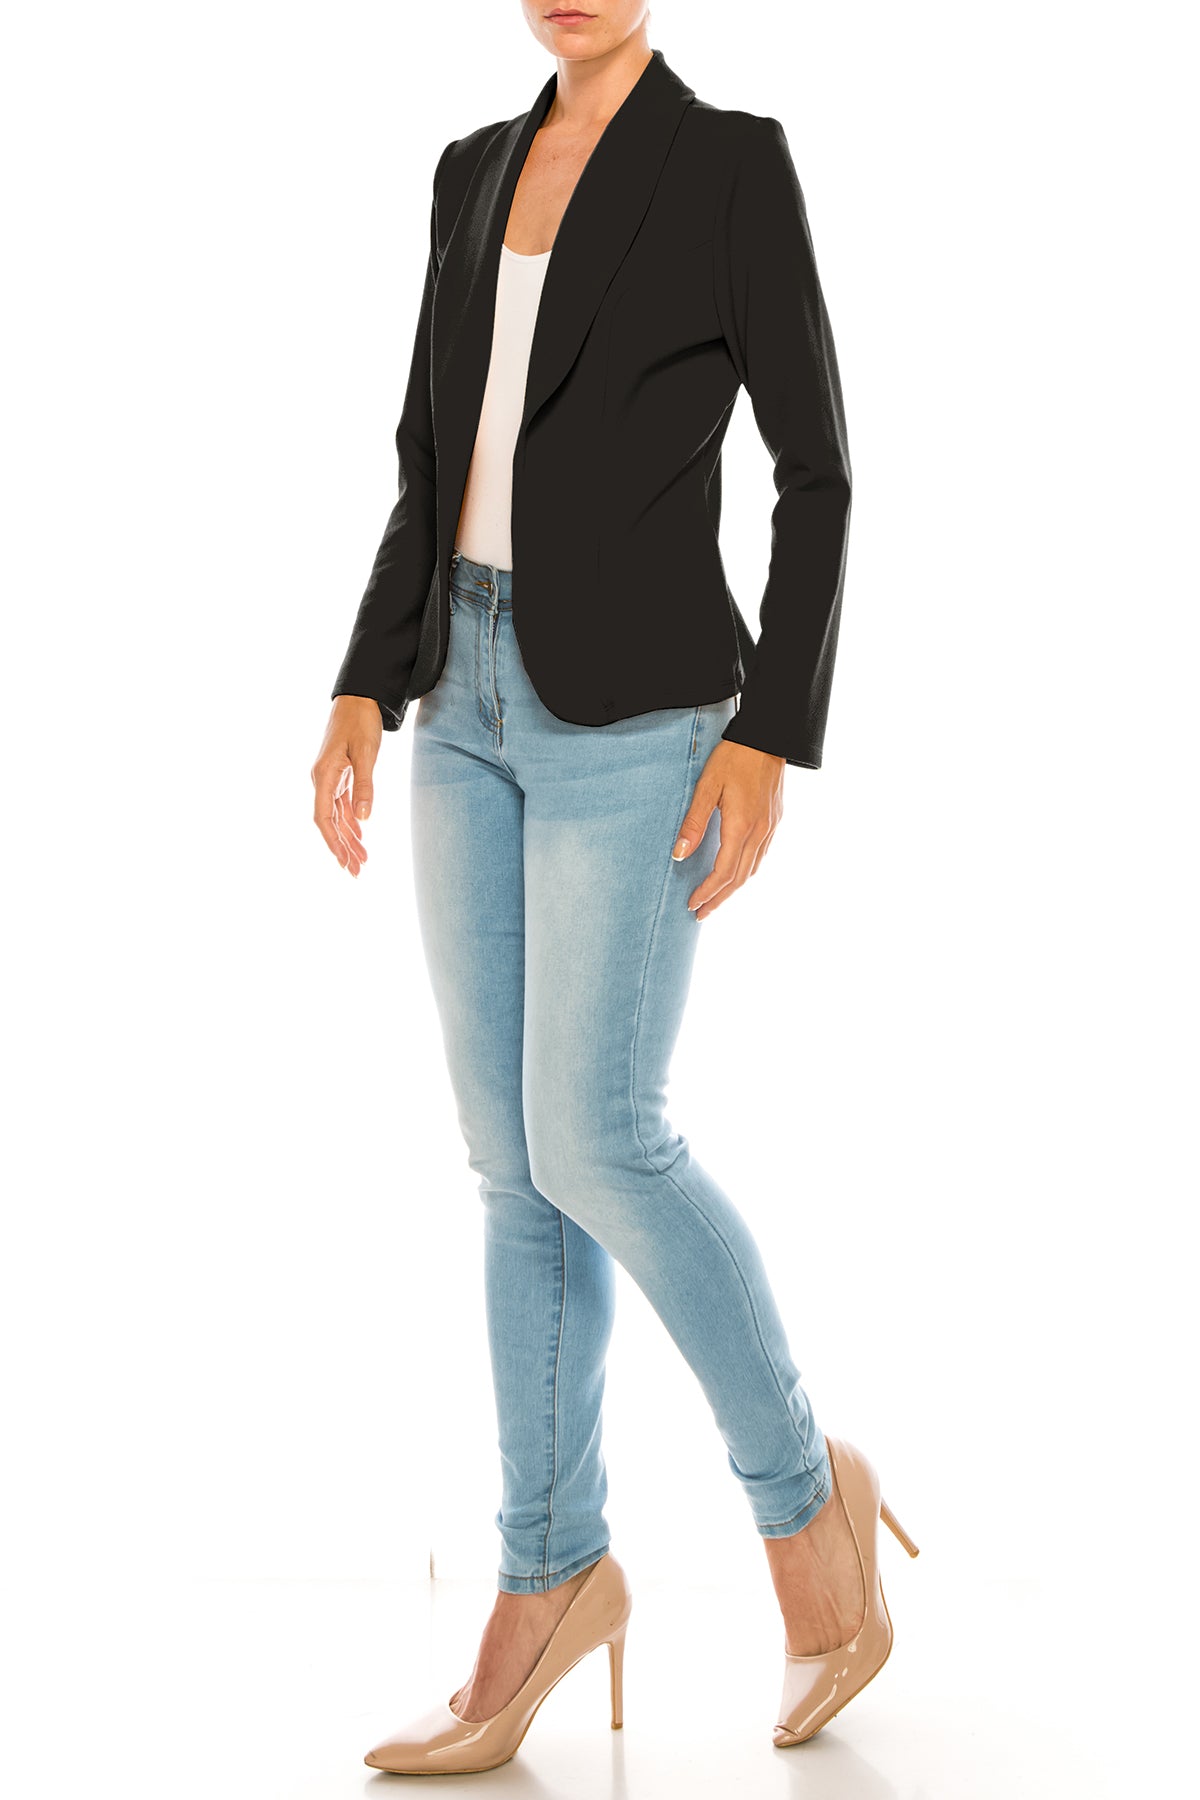 Women's Casual Solid Office Work Long Sleeve Fitted Blazer Jacket